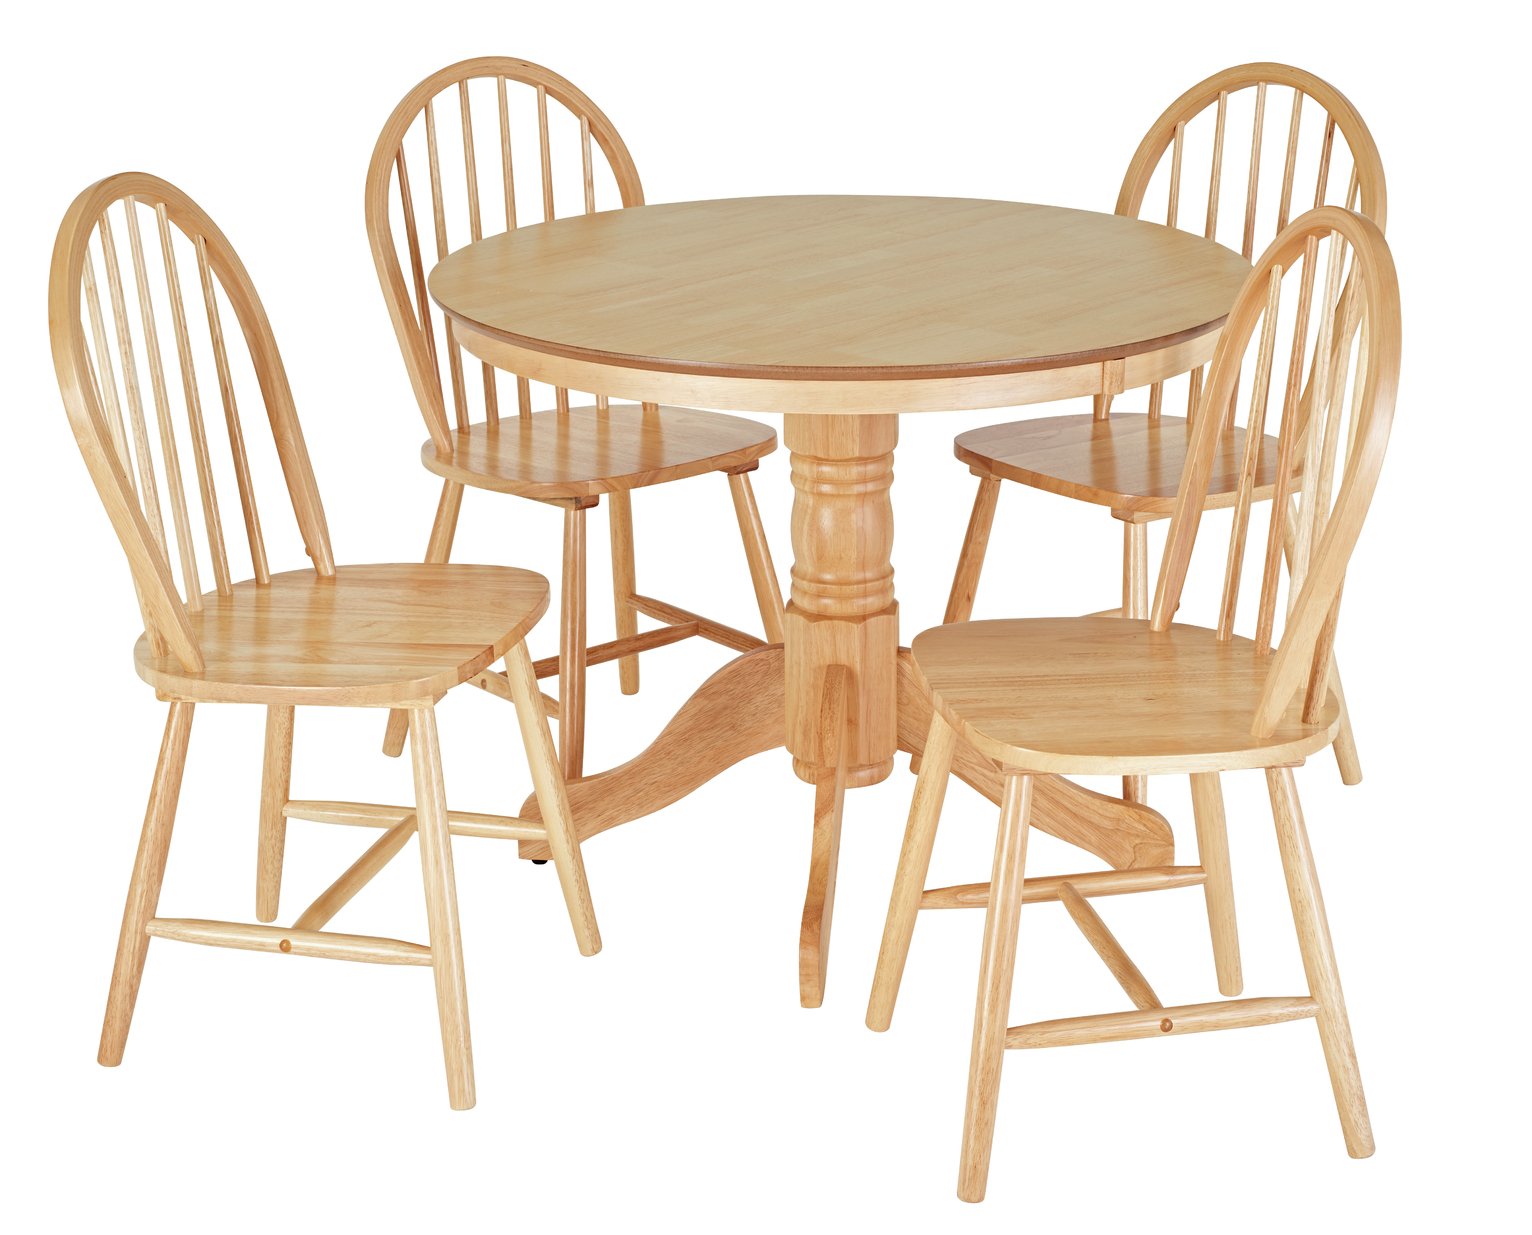 Argos Home Kentucky Solid Wood Dining Table & 4 Chairs